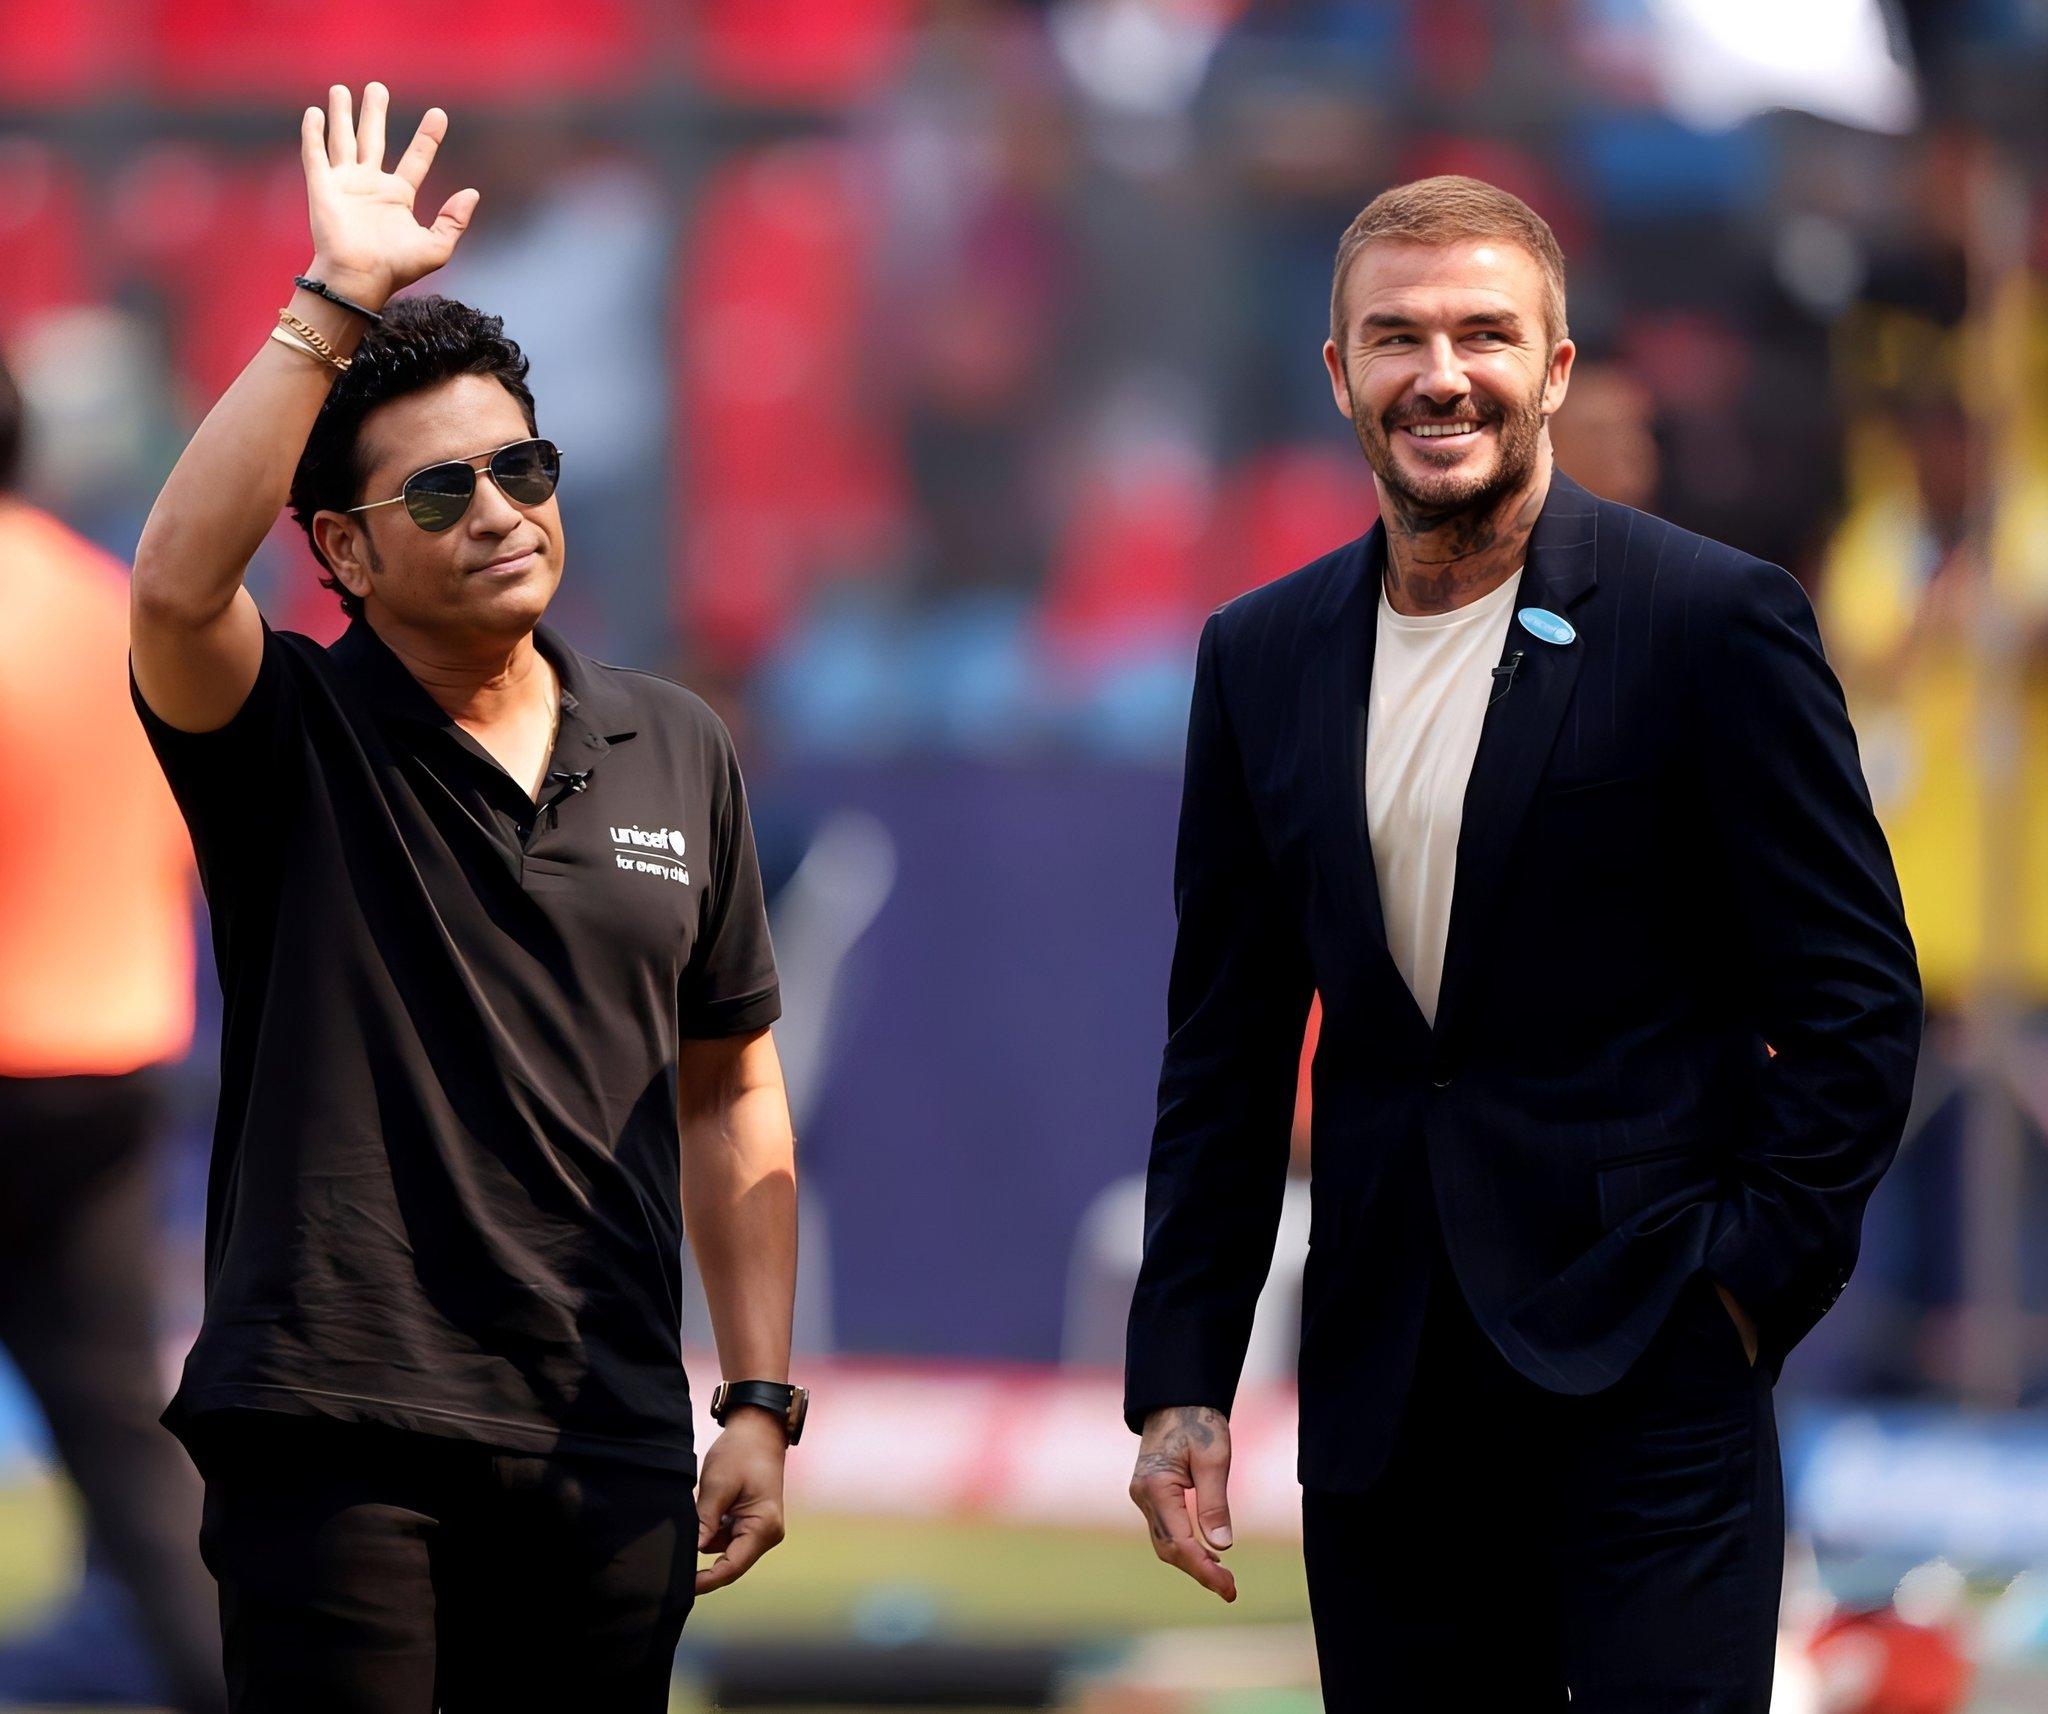 Sachin Tendulkar made millions of fans happy today just by showing up for the match. The ace cricketer brought with him the ever-gorgeous legendary footballer David Beckham 